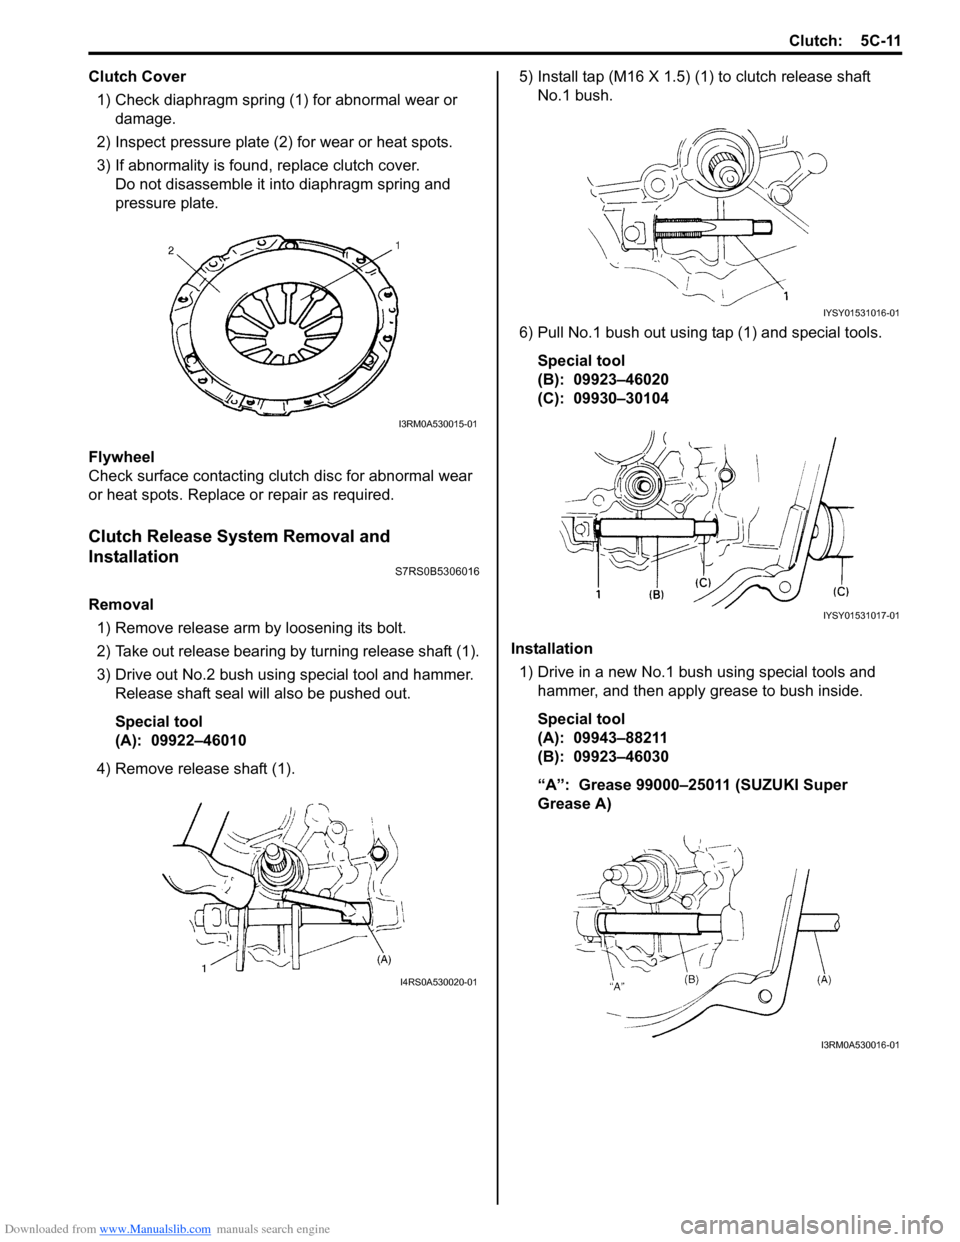 SUZUKI SWIFT 2007 2.G Service User Guide Downloaded from www.Manualslib.com manuals search engine Clutch: 5C-11
Clutch Cover1) Check diaphragm spring (1) for abnormal wear or  damage.
2) Inspect pressure plate (2) for wear or heat spots.
3) 